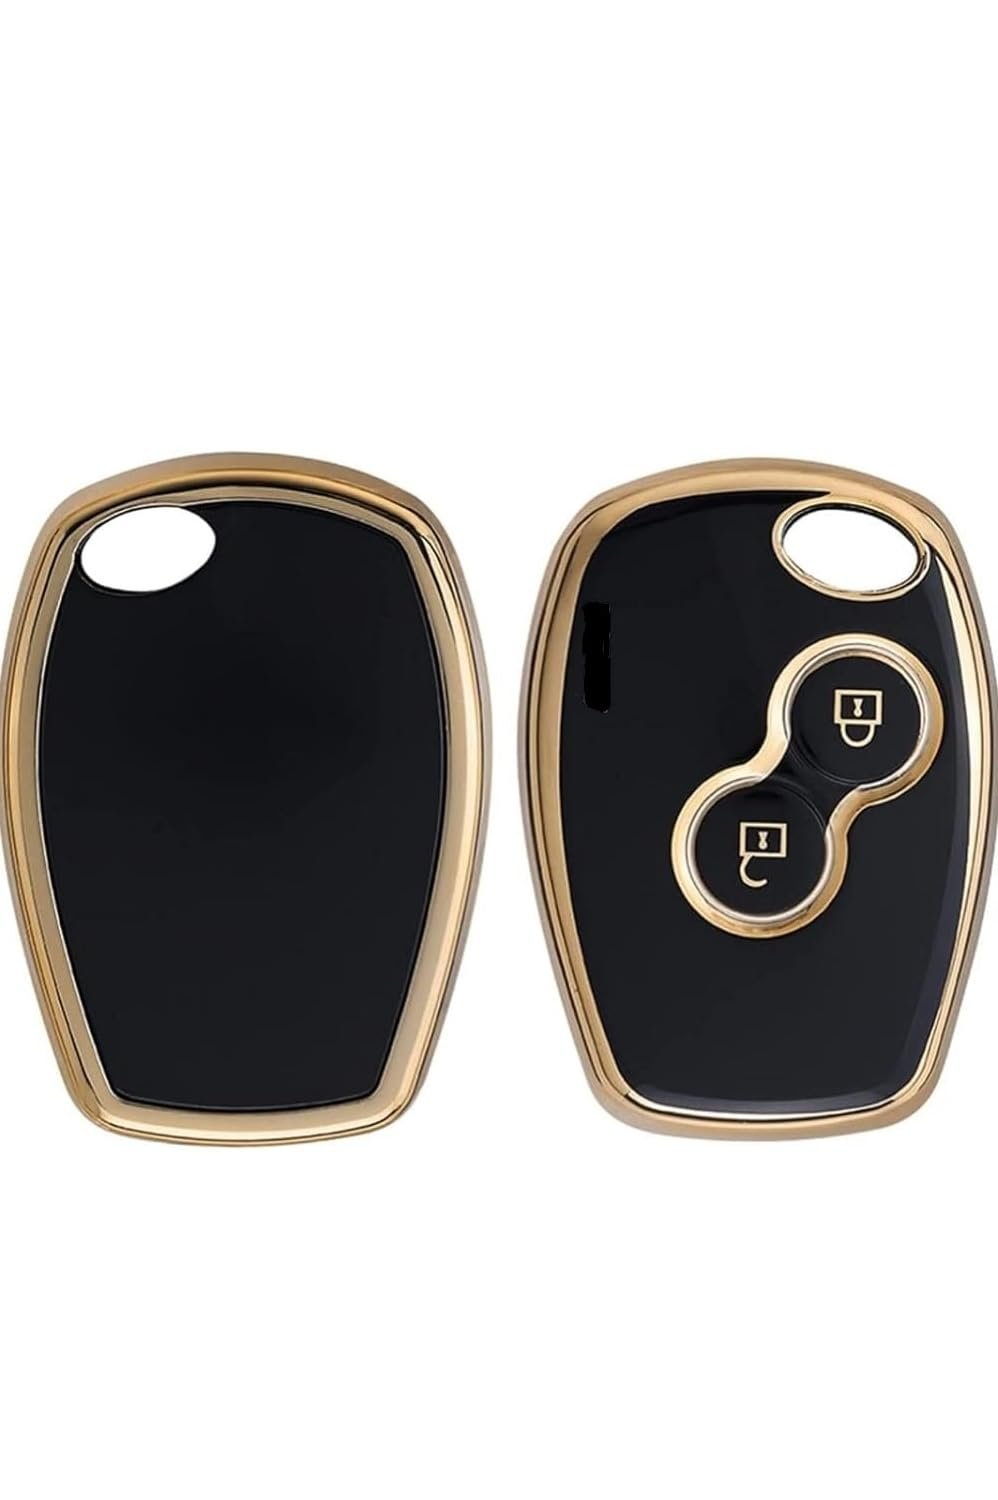 TPU Car Key Cover Compatible with Ren-Ault Logan, Duster, Verito, Lodgy 2 Button Remote Key (Gold/Black) Image 